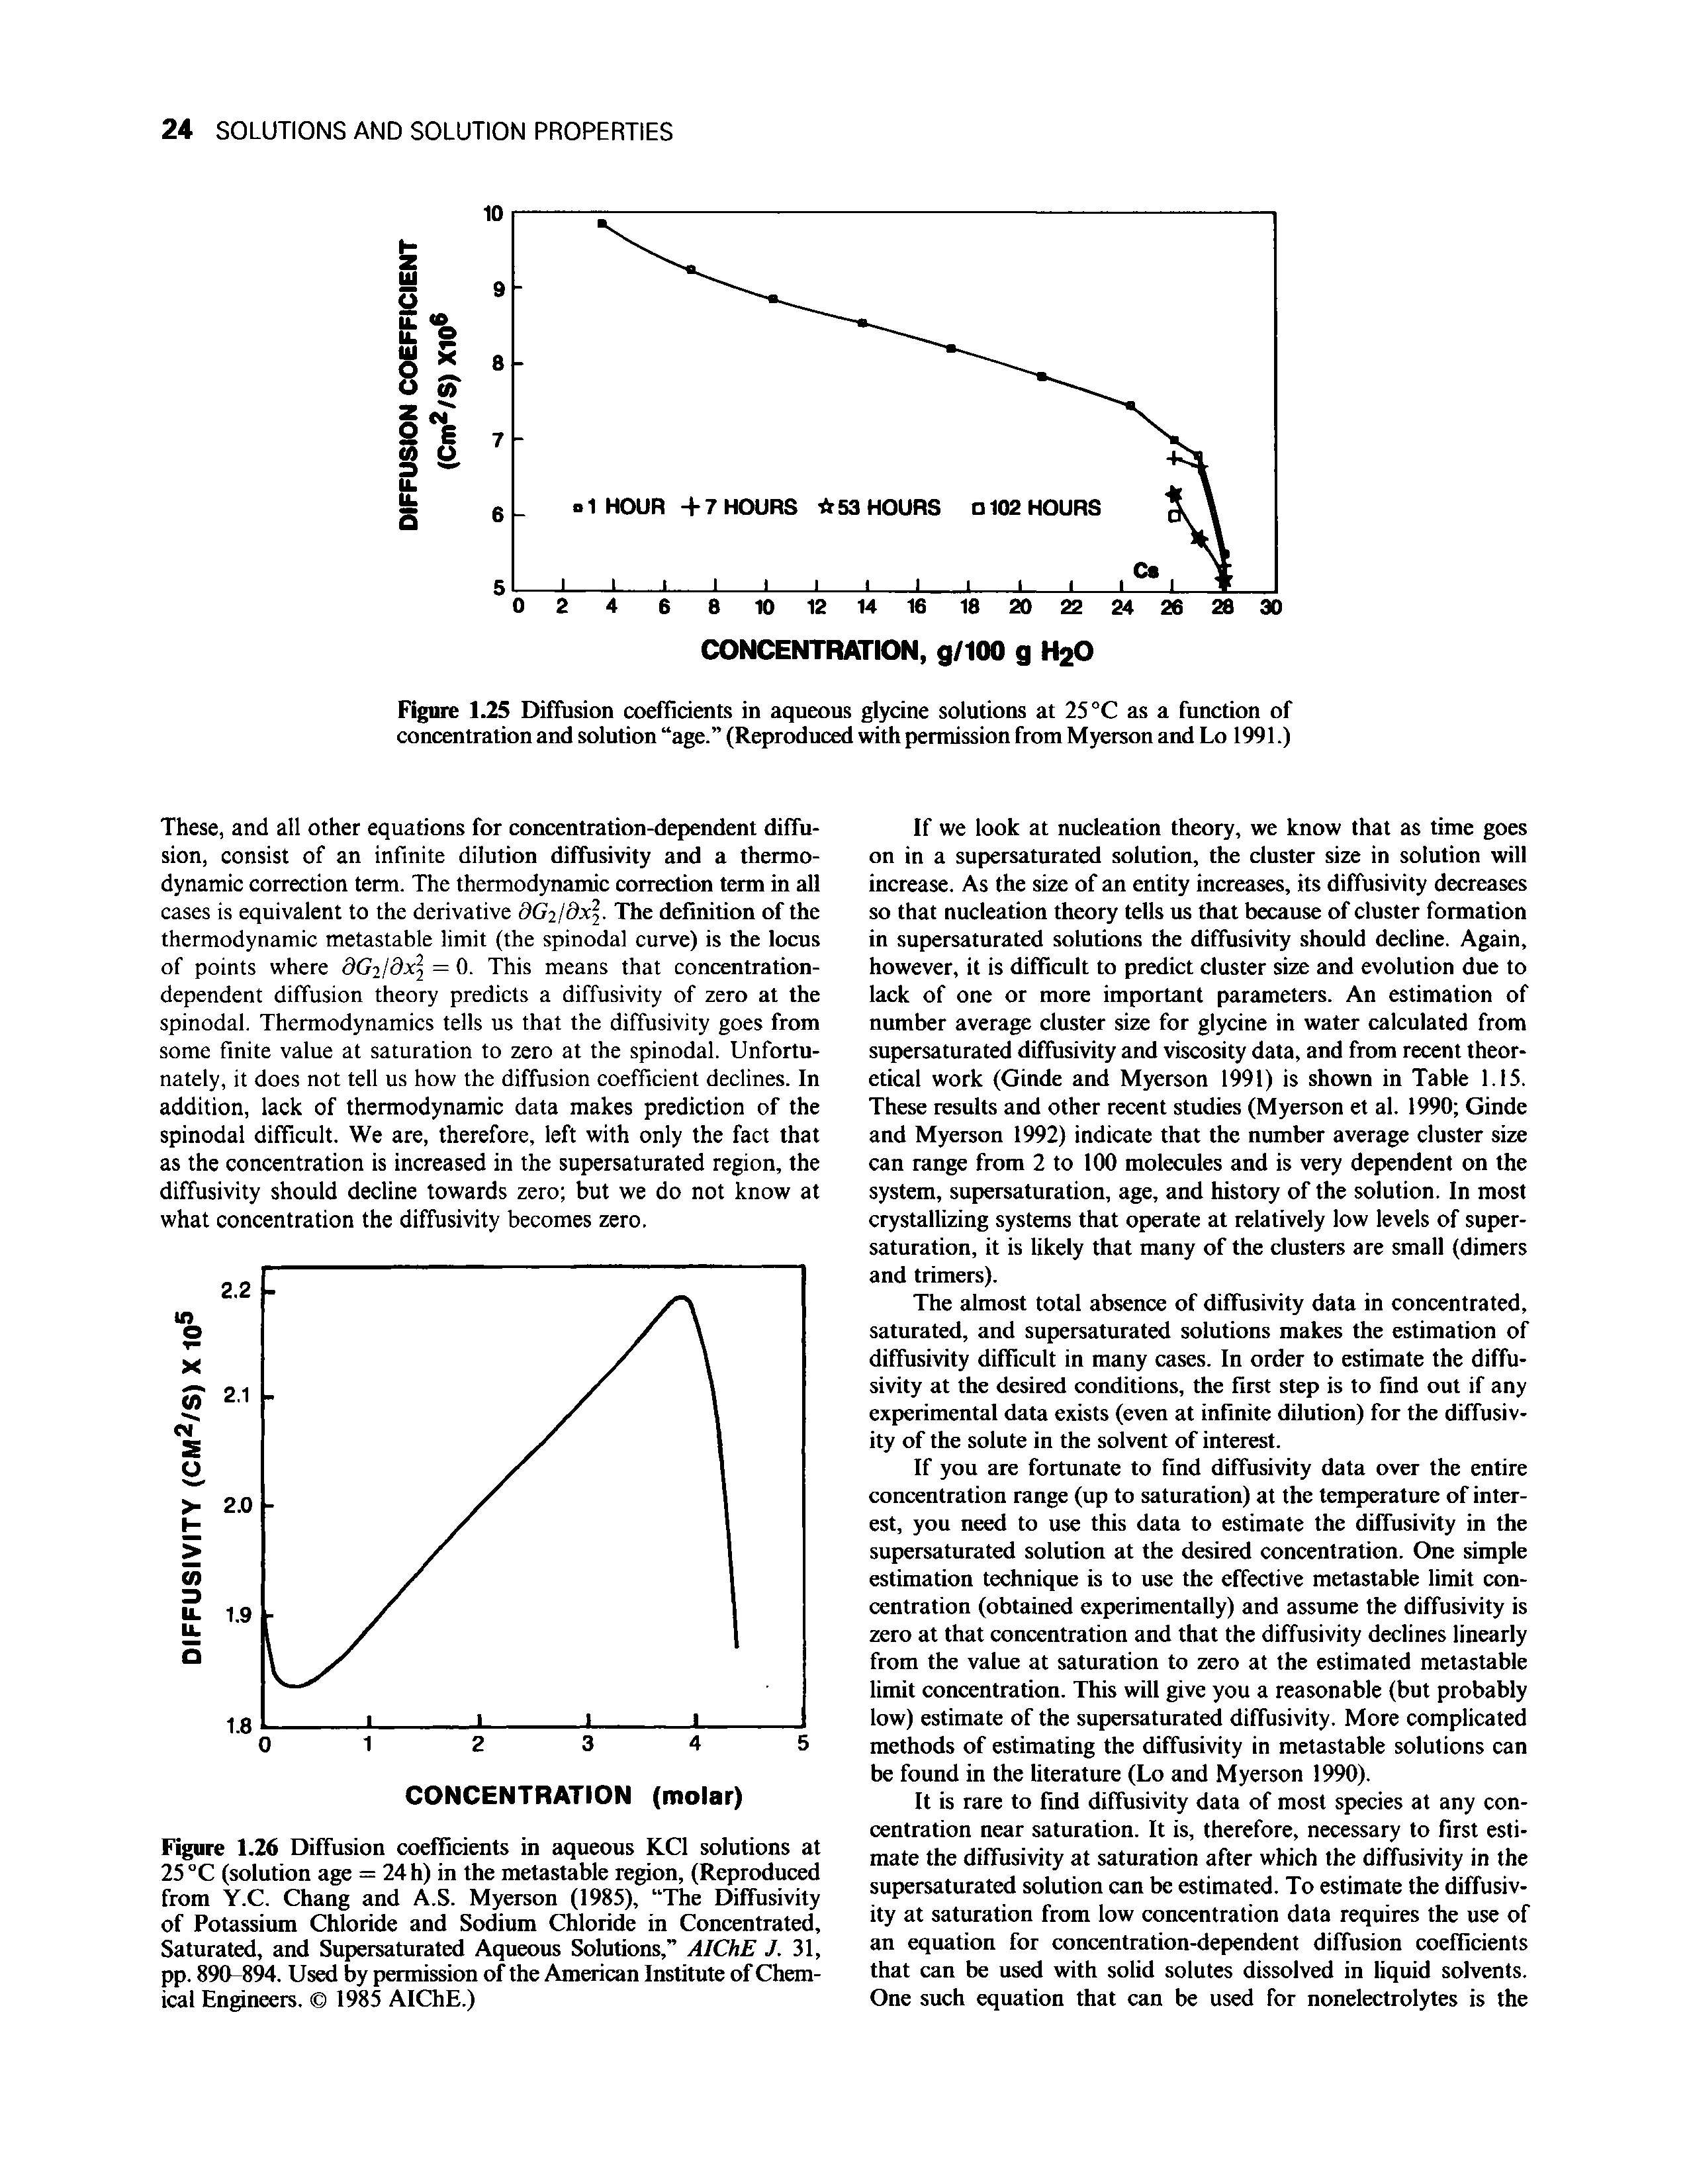 Figure 1.26 Diffusion coefficients in aqueous KCl solutions at 25 °C (solution age = 24 h) in the metastable region, (Reproduced from Y.C. Chang and A.S. Myerson (1985), The Diffusivity of Potassium Chloride and Sodium Chloride in Concentrated, Saturated, and Supersaturated Aqueous Solutions, AIChE 7. 31, pp. 890 894. Used by permission of the American Institute of Chemical Engineers. 1985 AIChE.)...